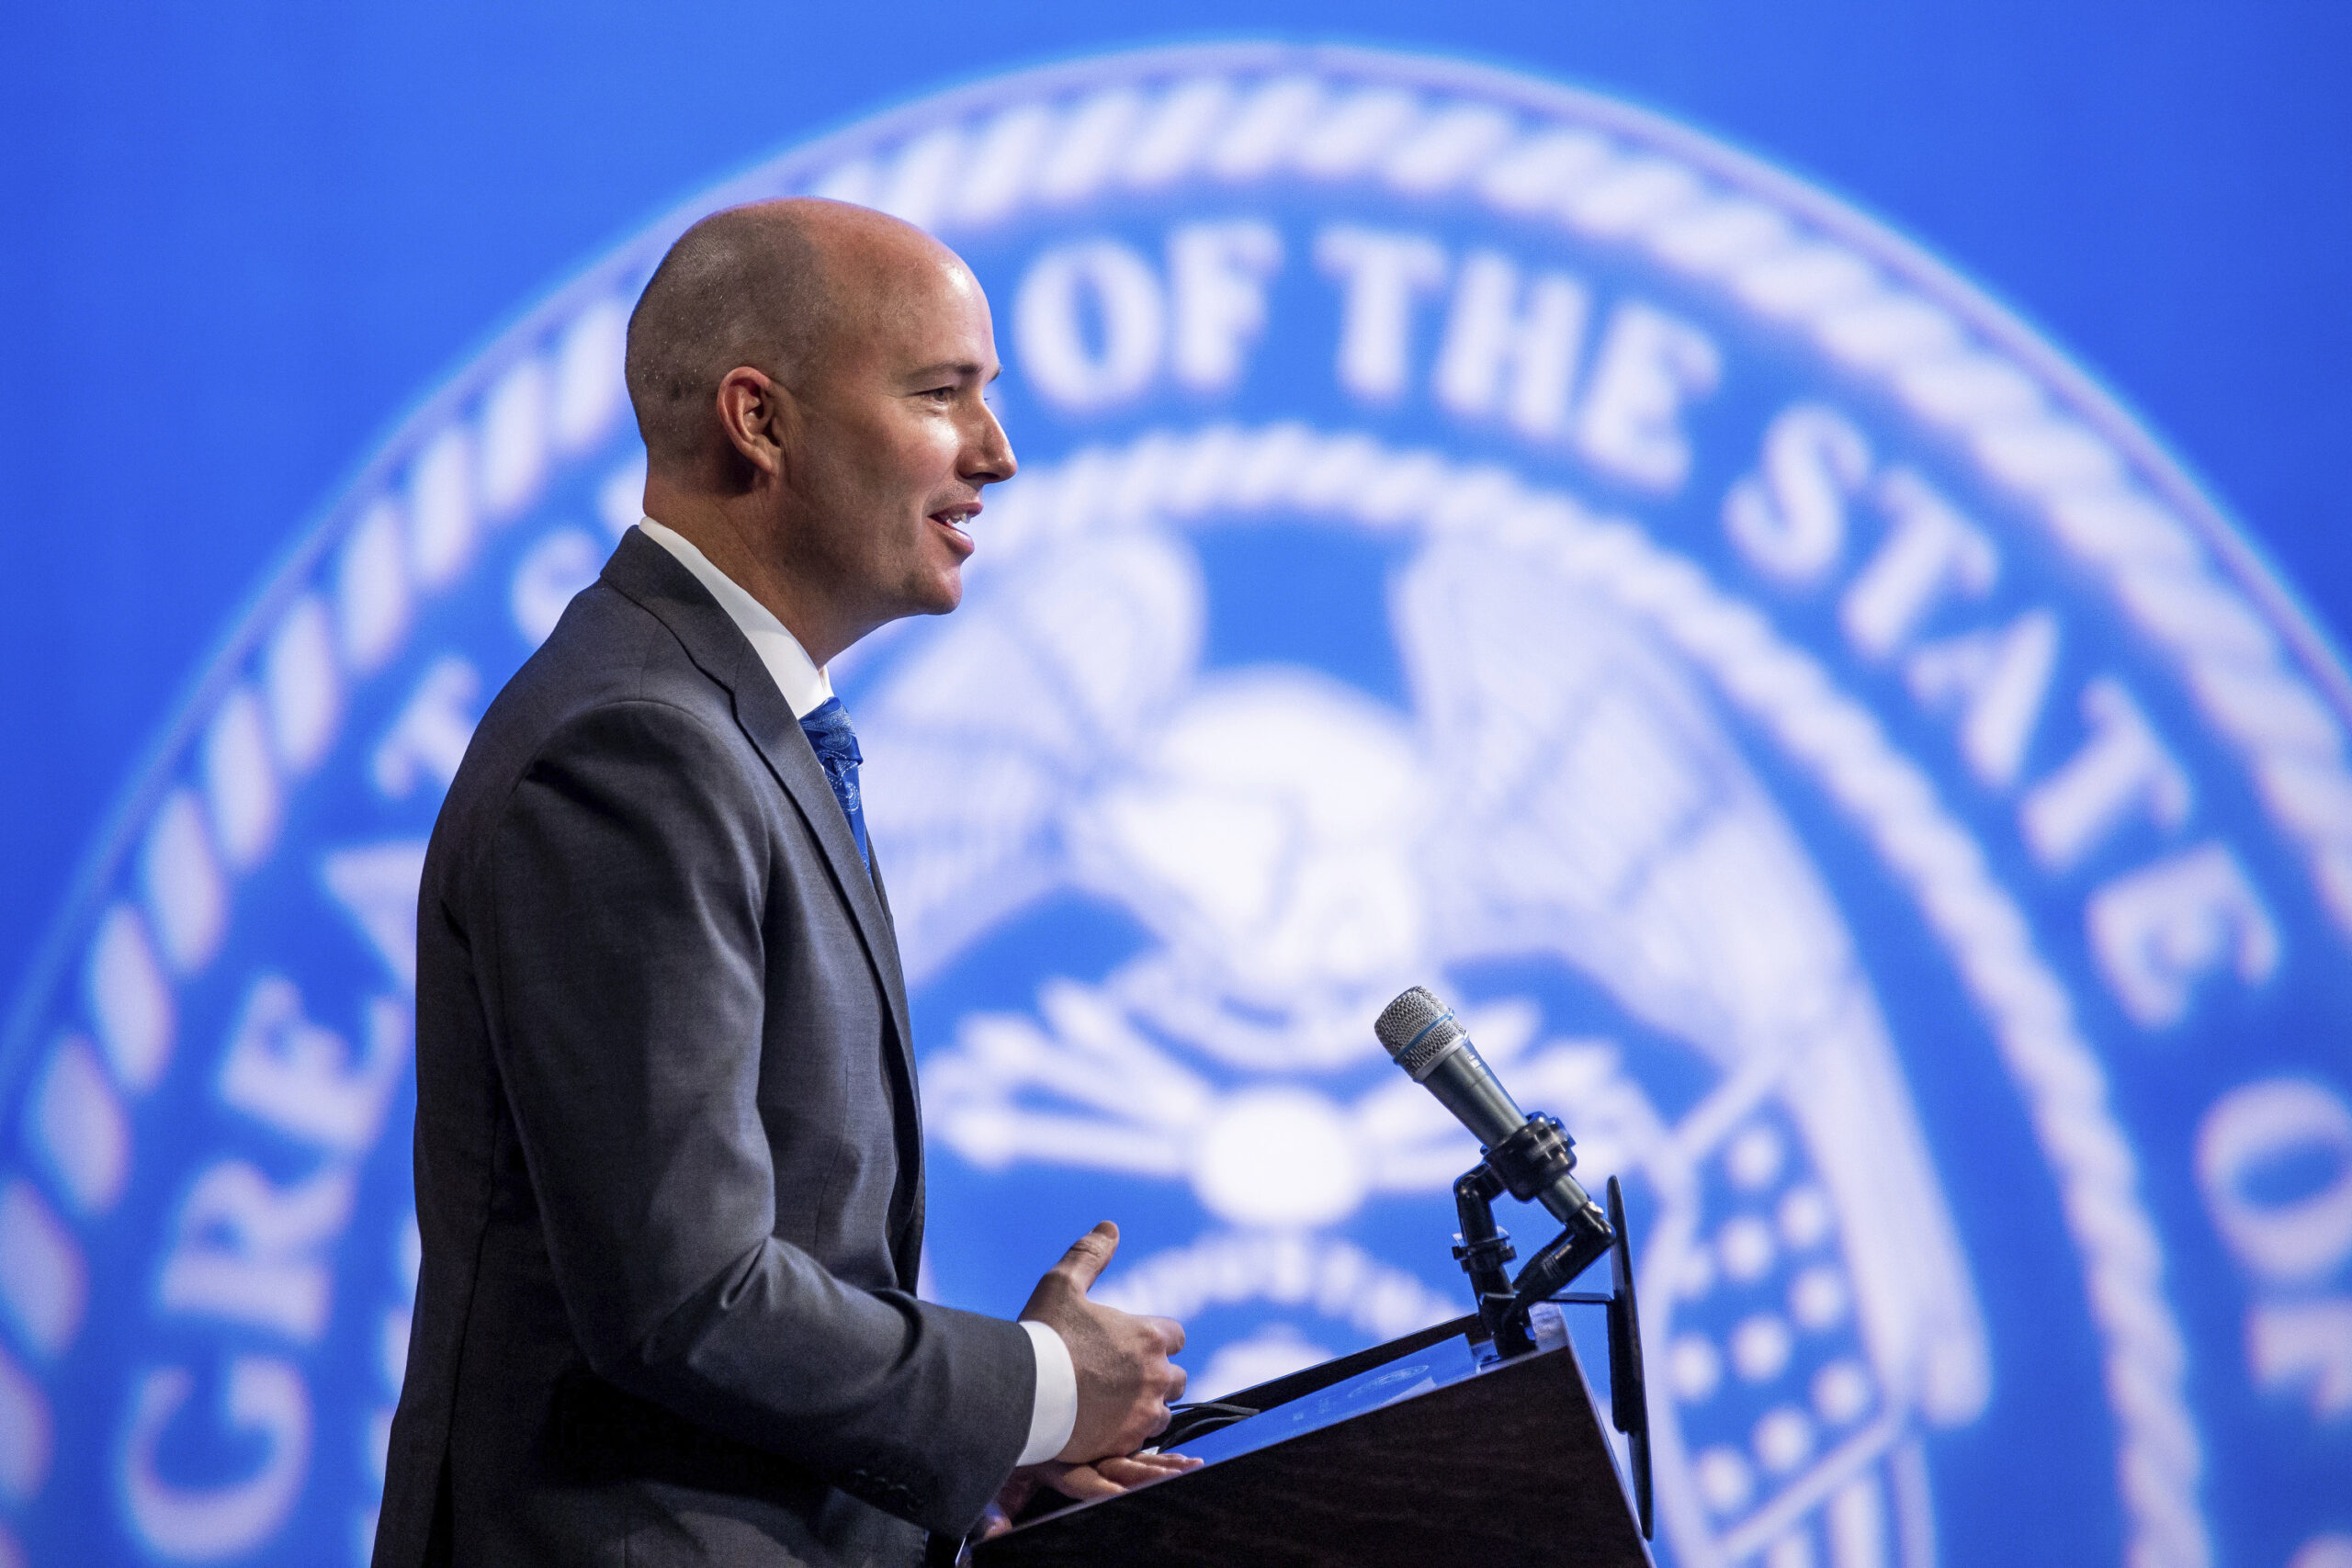 Utah Gov. Spencer Cox speaks during his monthly news conference on March 18, 2021, in Salt Lake City. Cox has signed a law requiring biological fathers to pay half of a woman's out-of-pocket pregnancy costs. (Spenser Heaps/The Deseret News via AP, Pool, File)